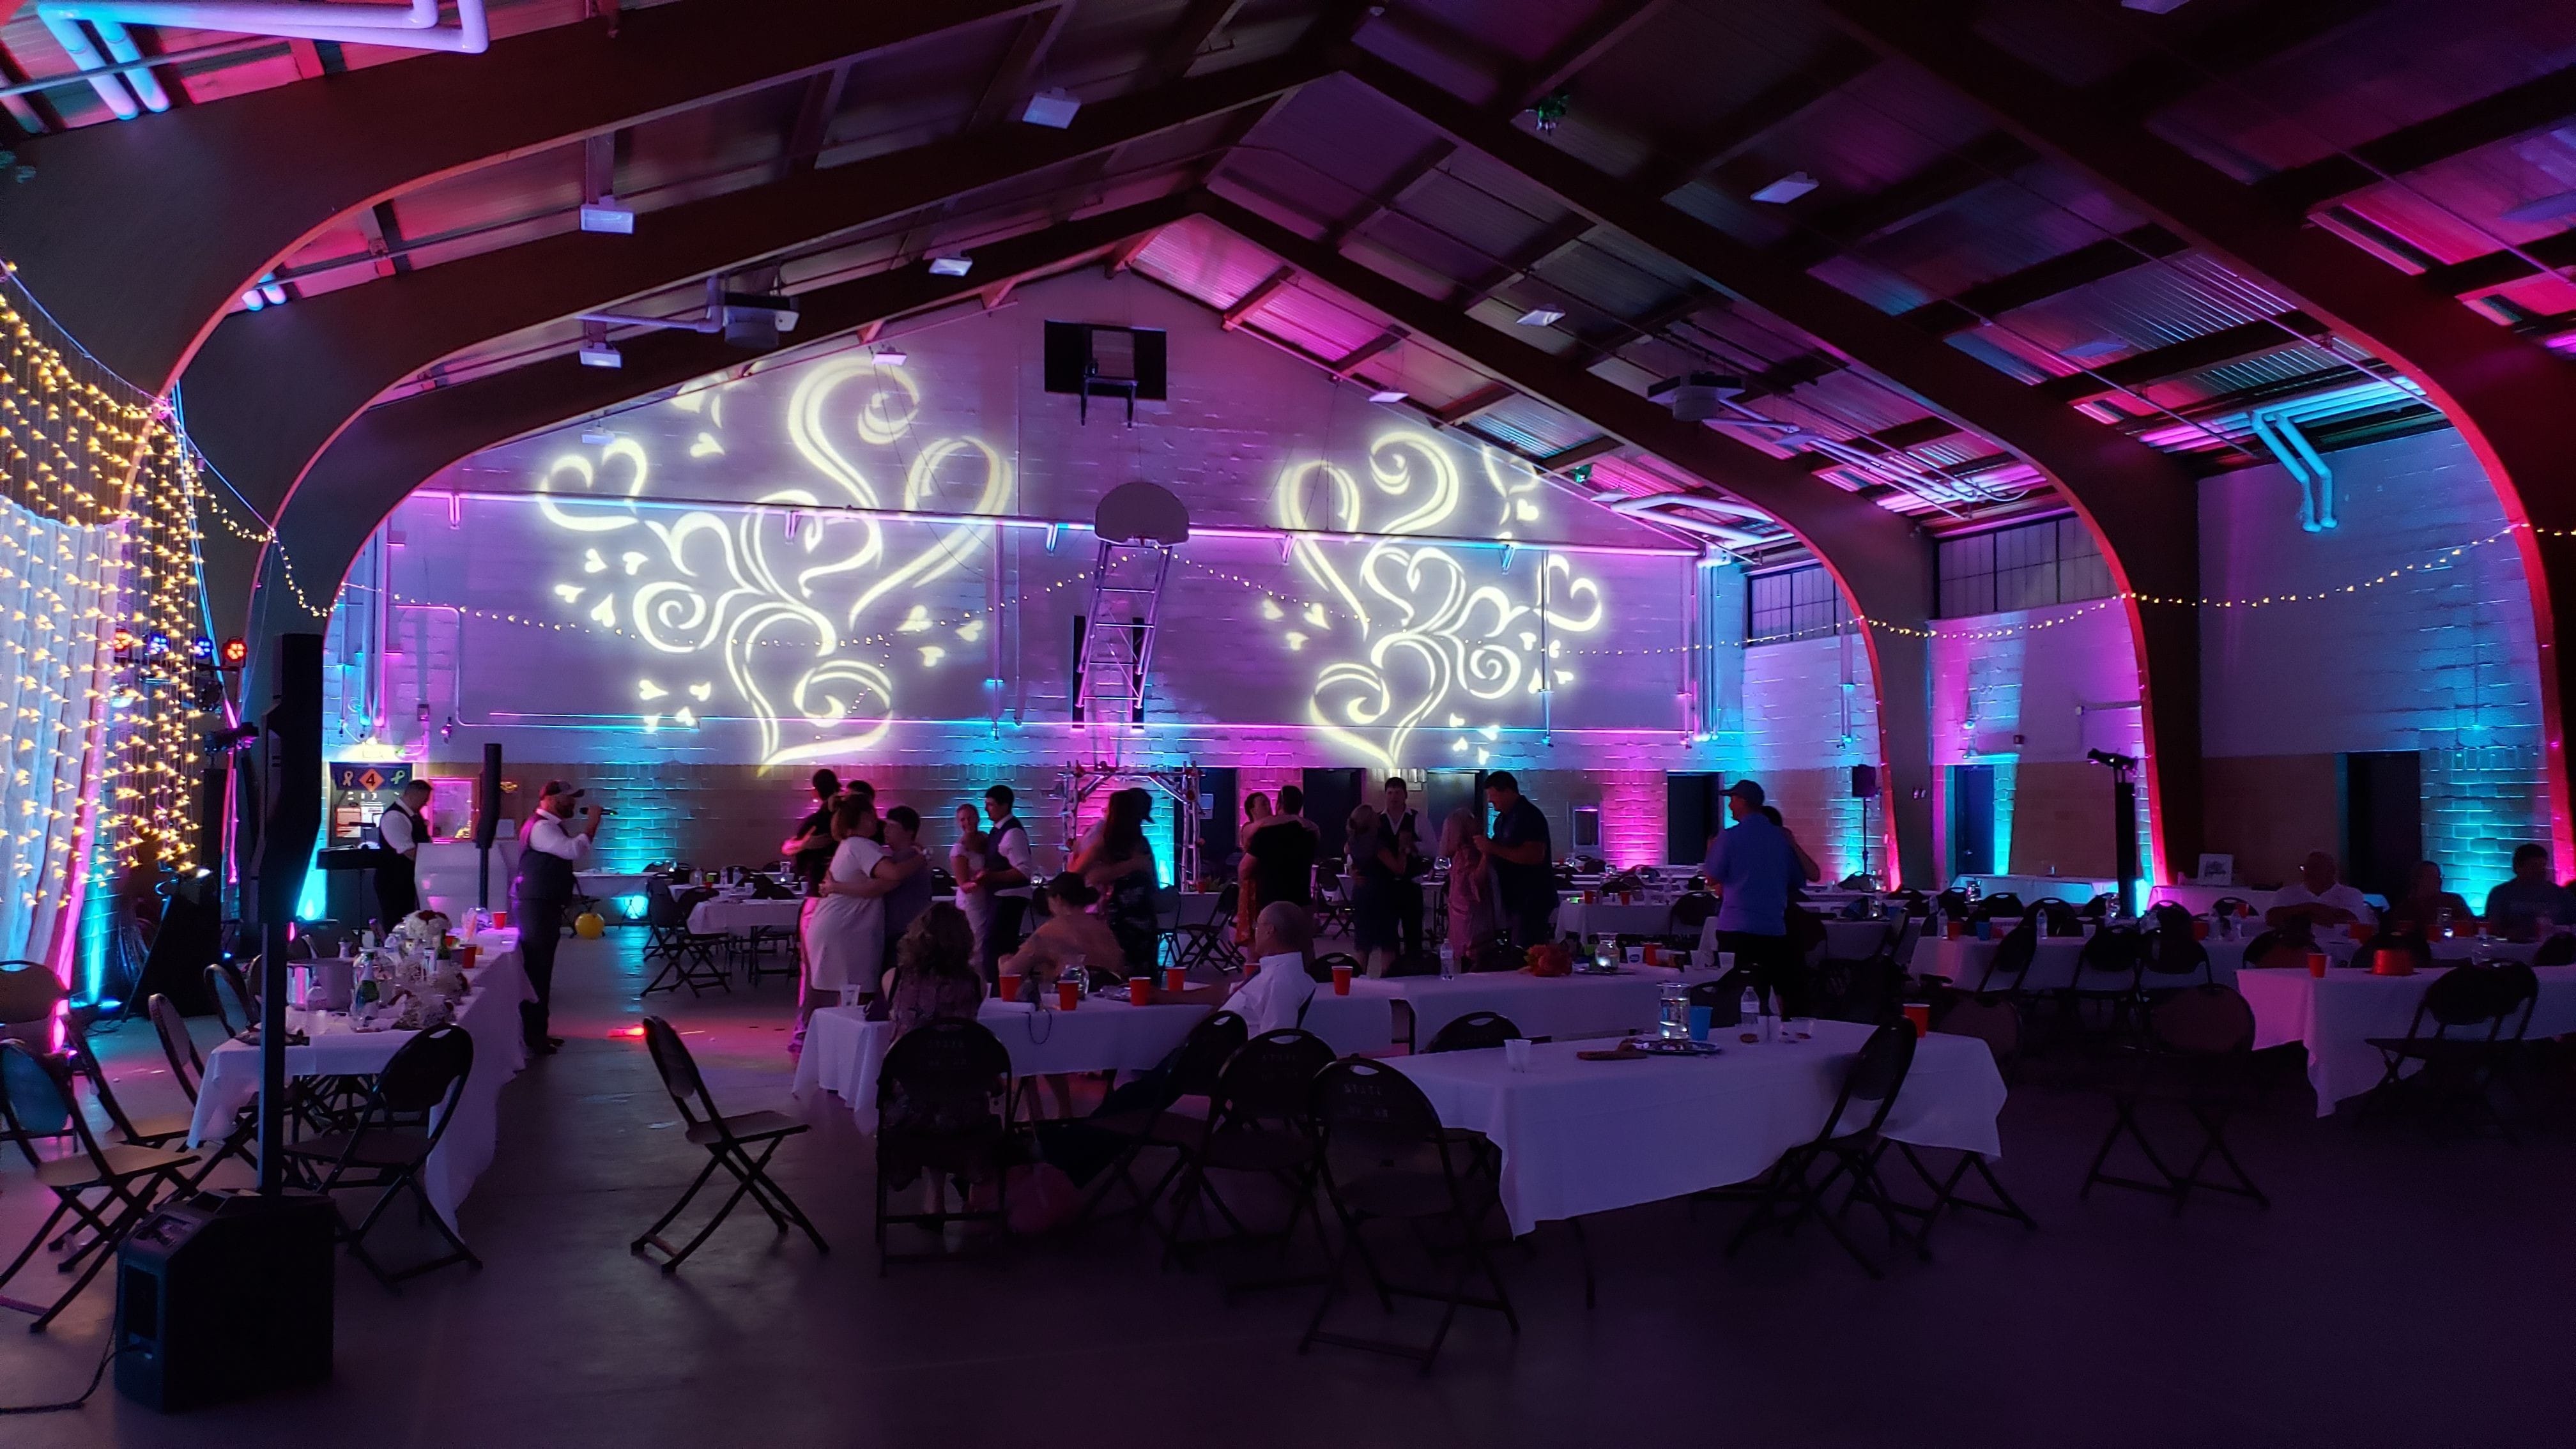 Wedding lighting at the Cloquet Armory with heart gobo patterns projected on the wall.